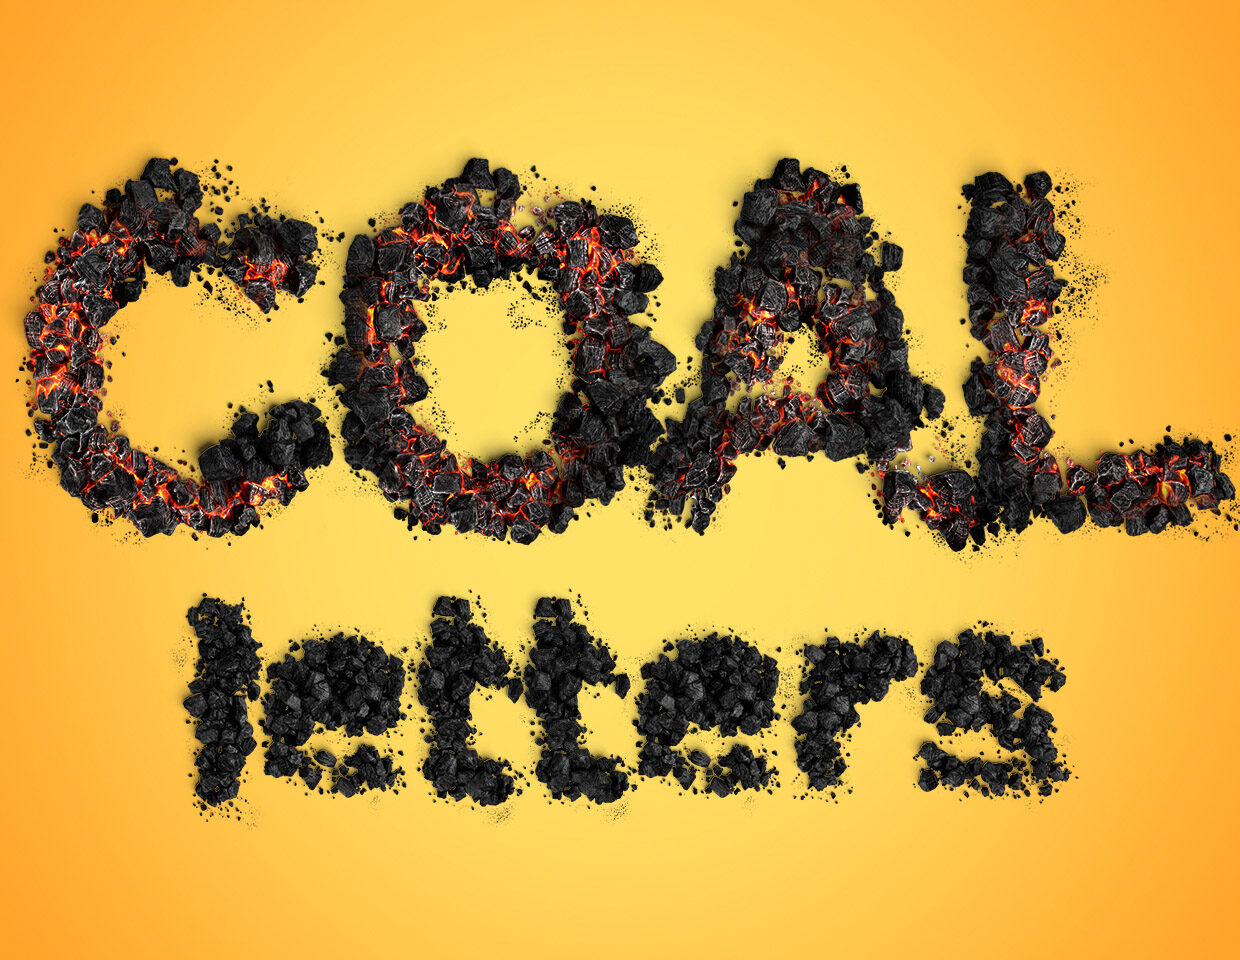 3D Psd Coal and Ember Letters